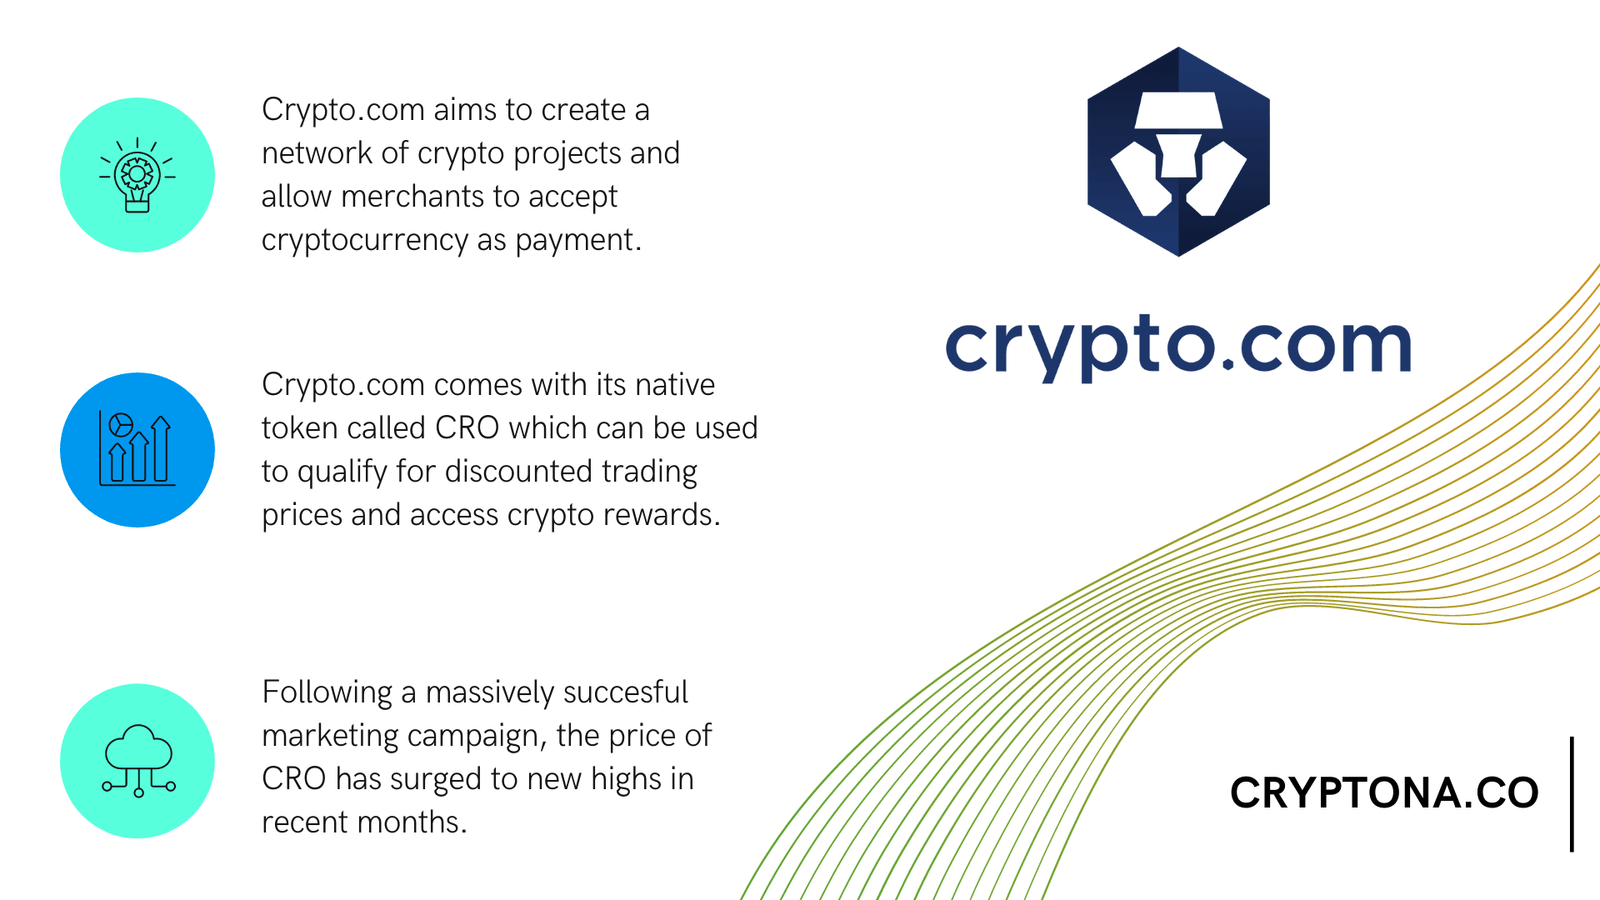 What is the native CRO token of crypto.com?